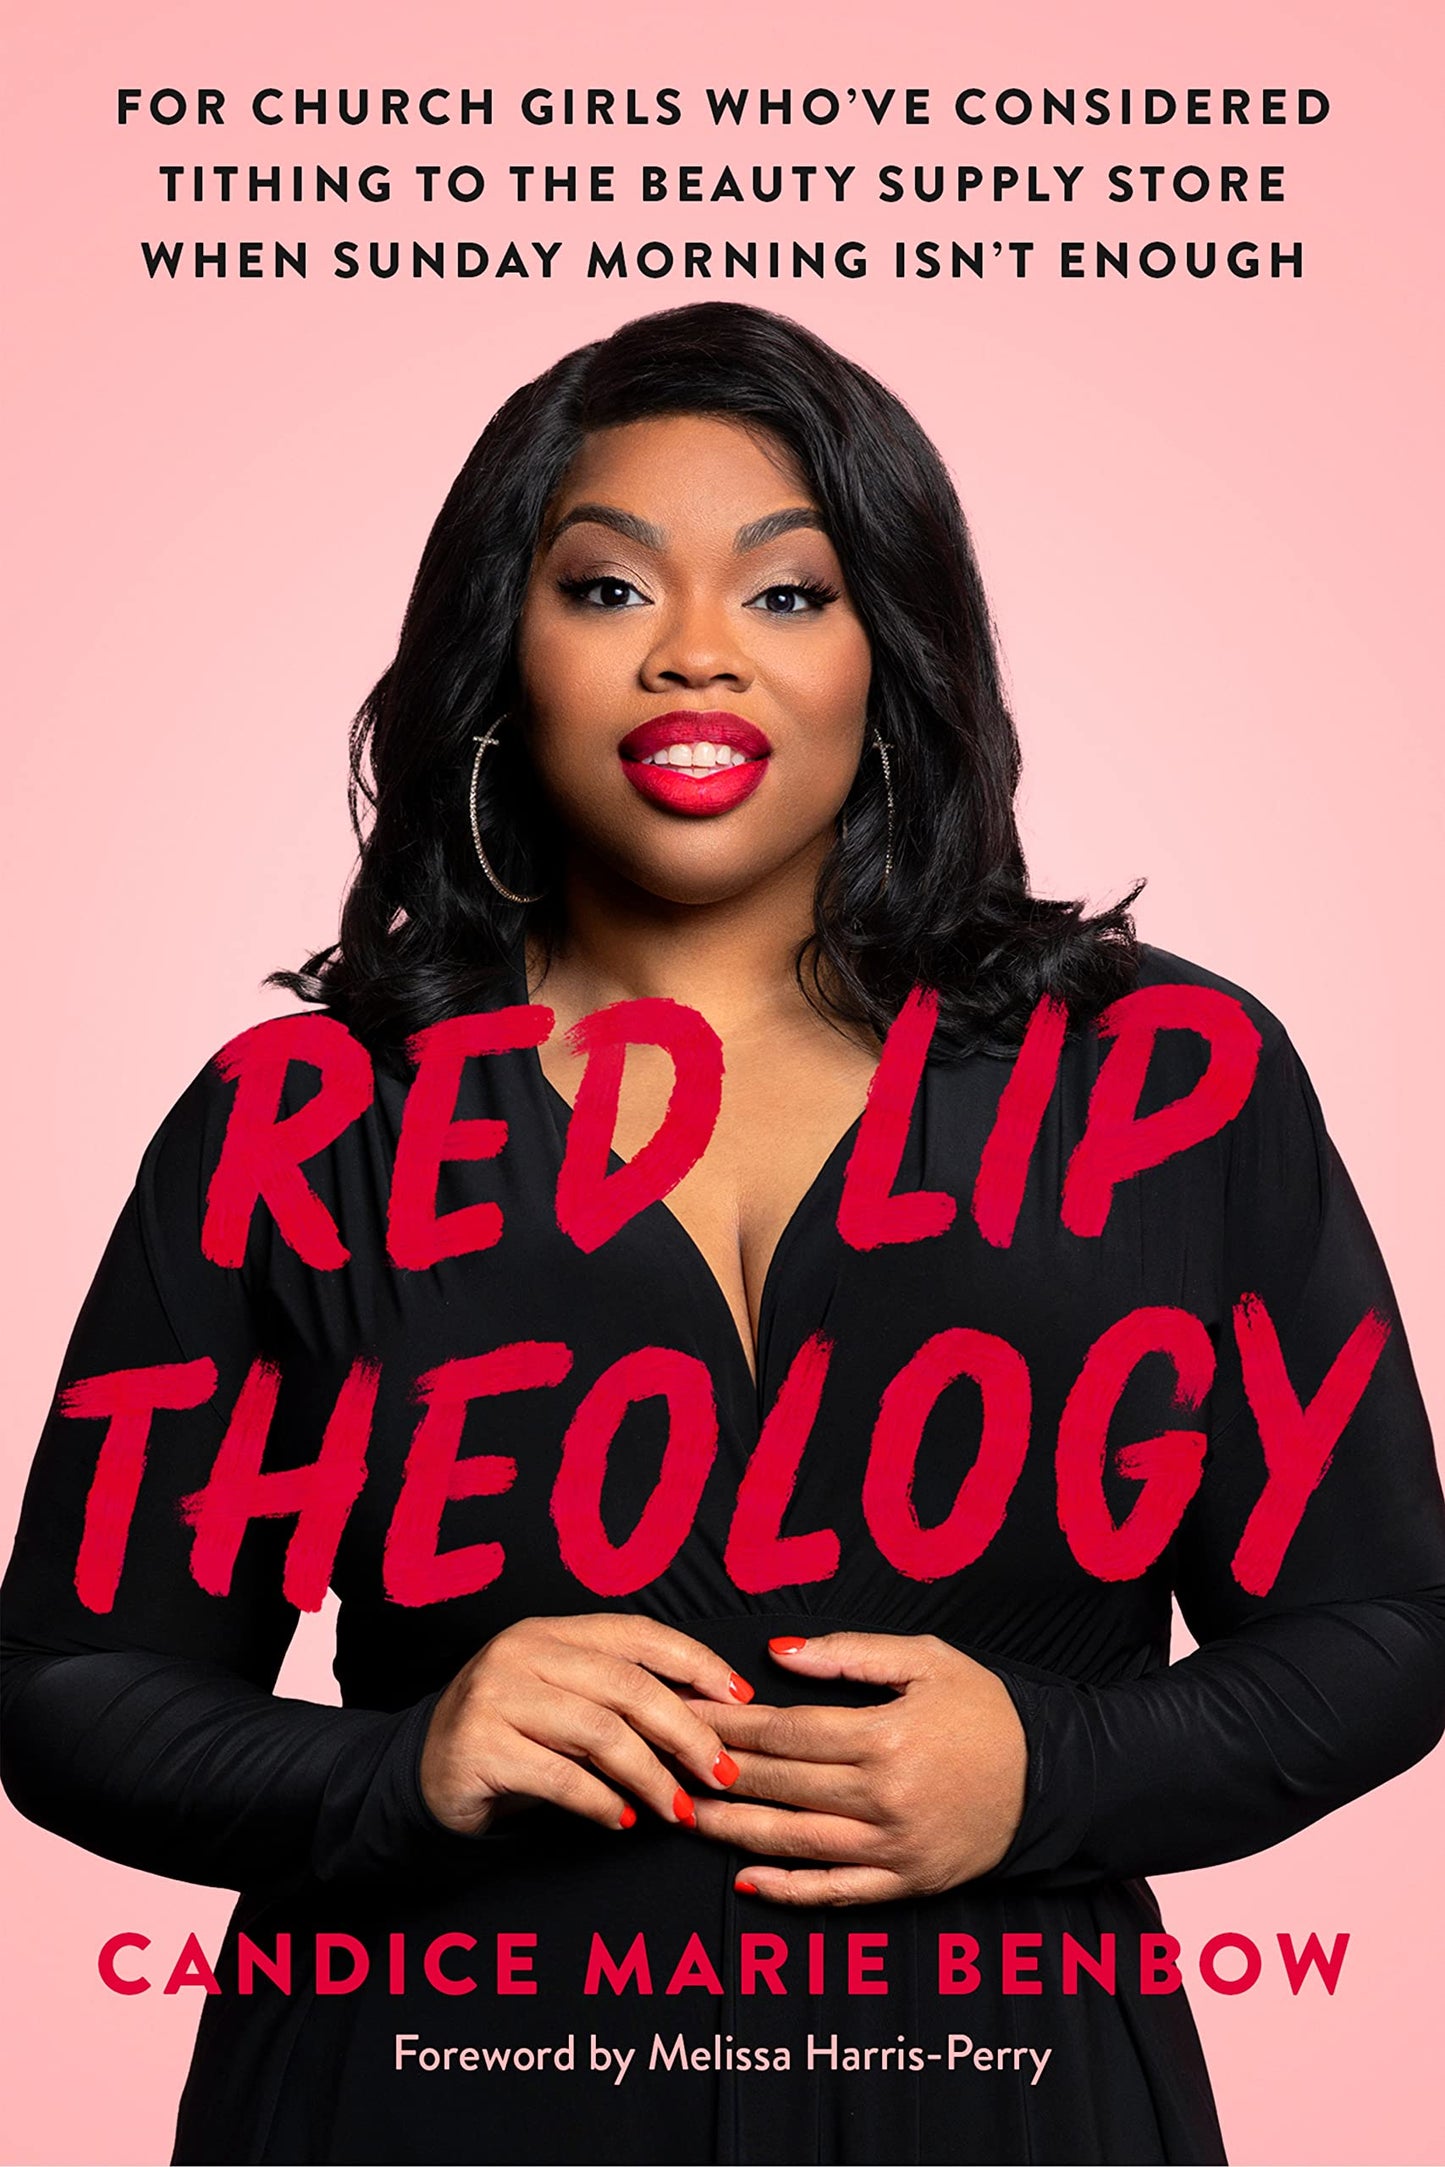 Red Lip Theology // For Church Girls Who've Considered Tithing to the Beauty Supply Store When Sunday Morning Isn't Enough